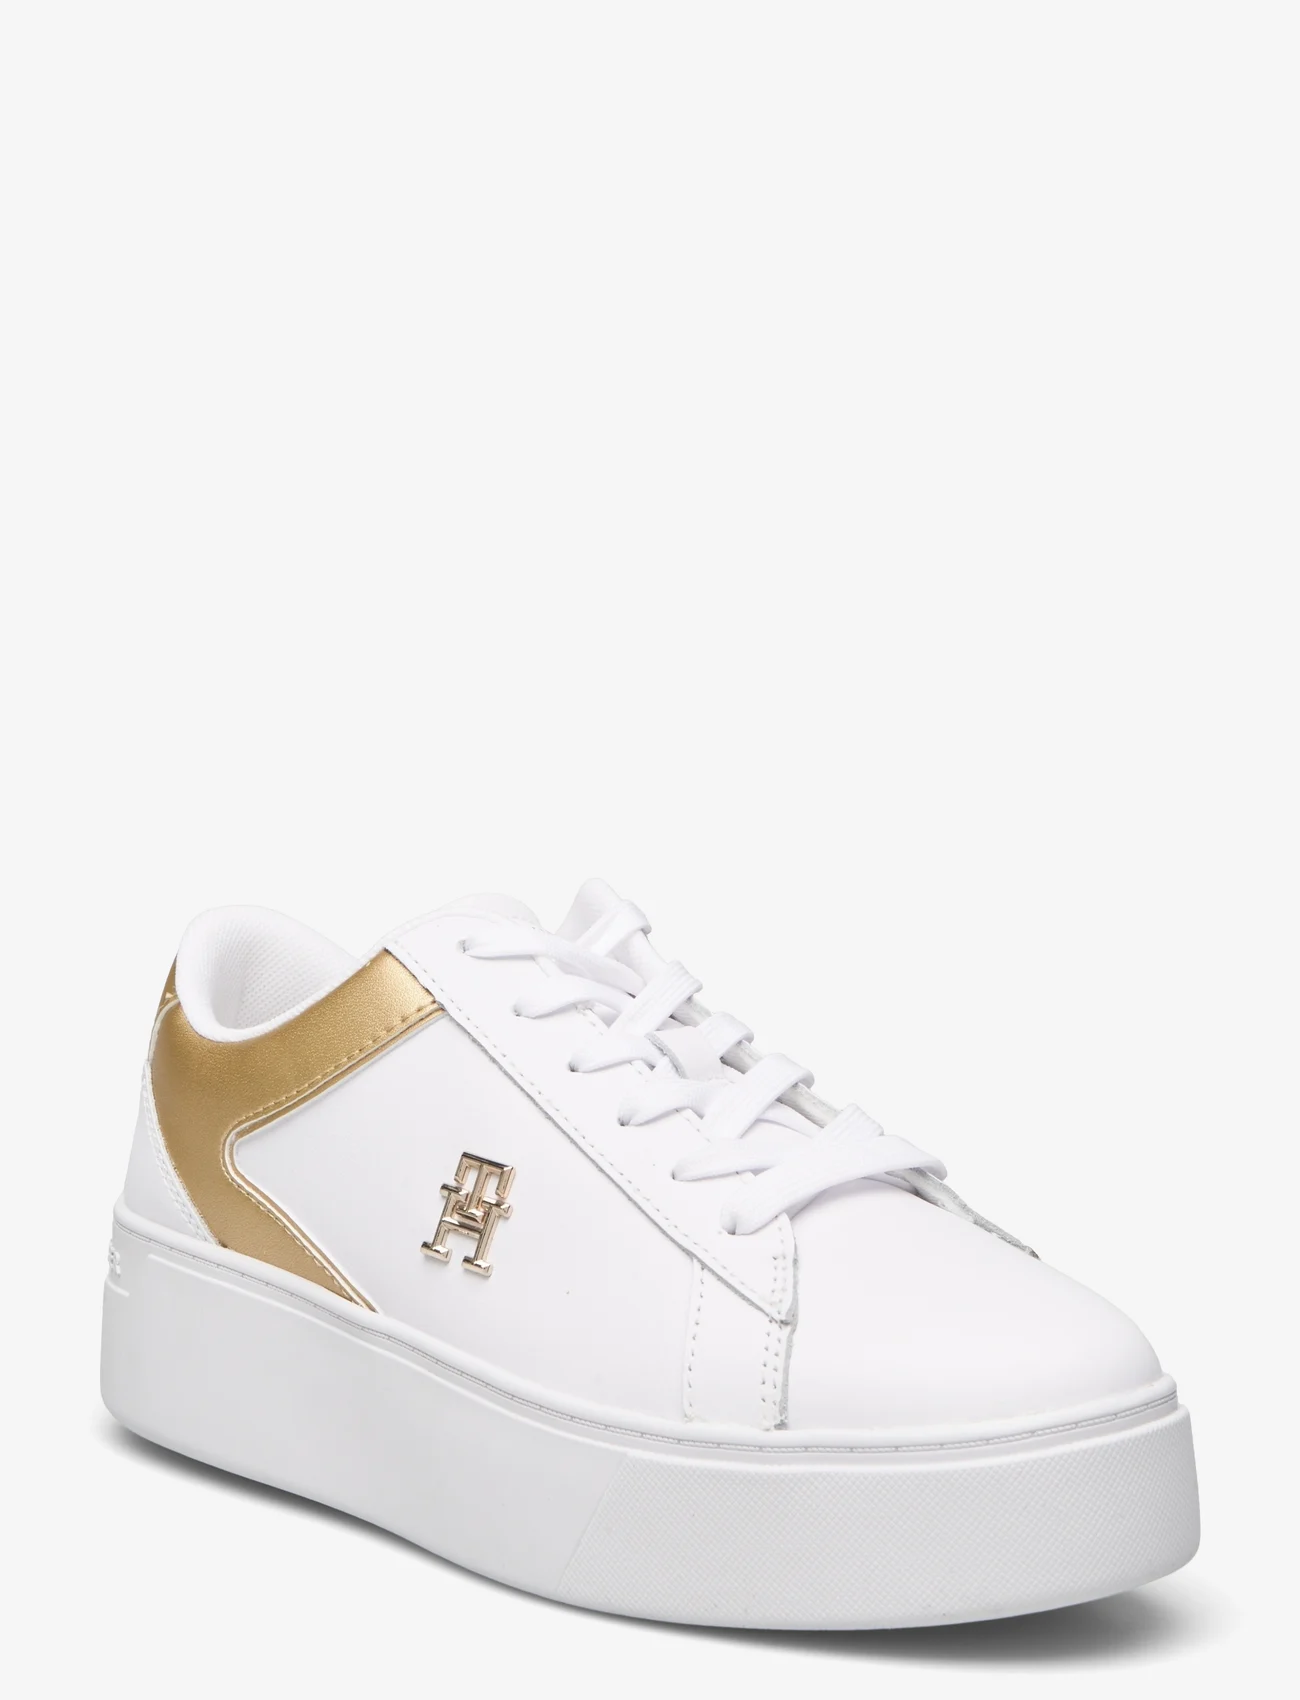 Tommy Hilfiger - TH PLATFORM COURT SNEAKER GLD - low top sneakers - white/gold - 0